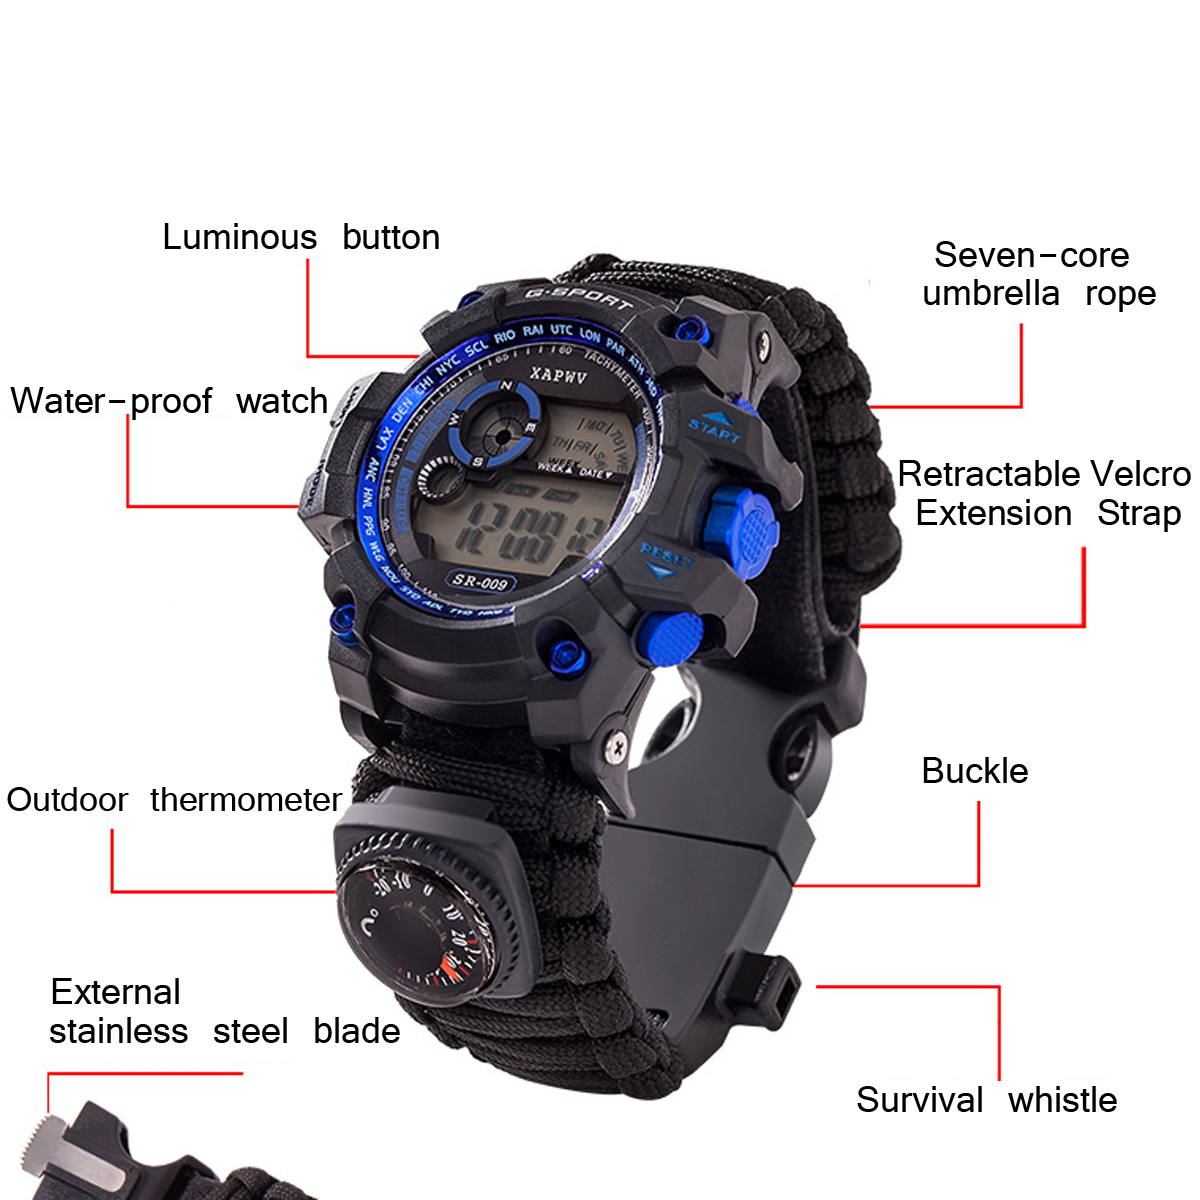 7 In 1 Survival Watch Camping Multifunctional Compass Date Alarm Paracord Bracelet LED Backlight Gadget EDC Tool